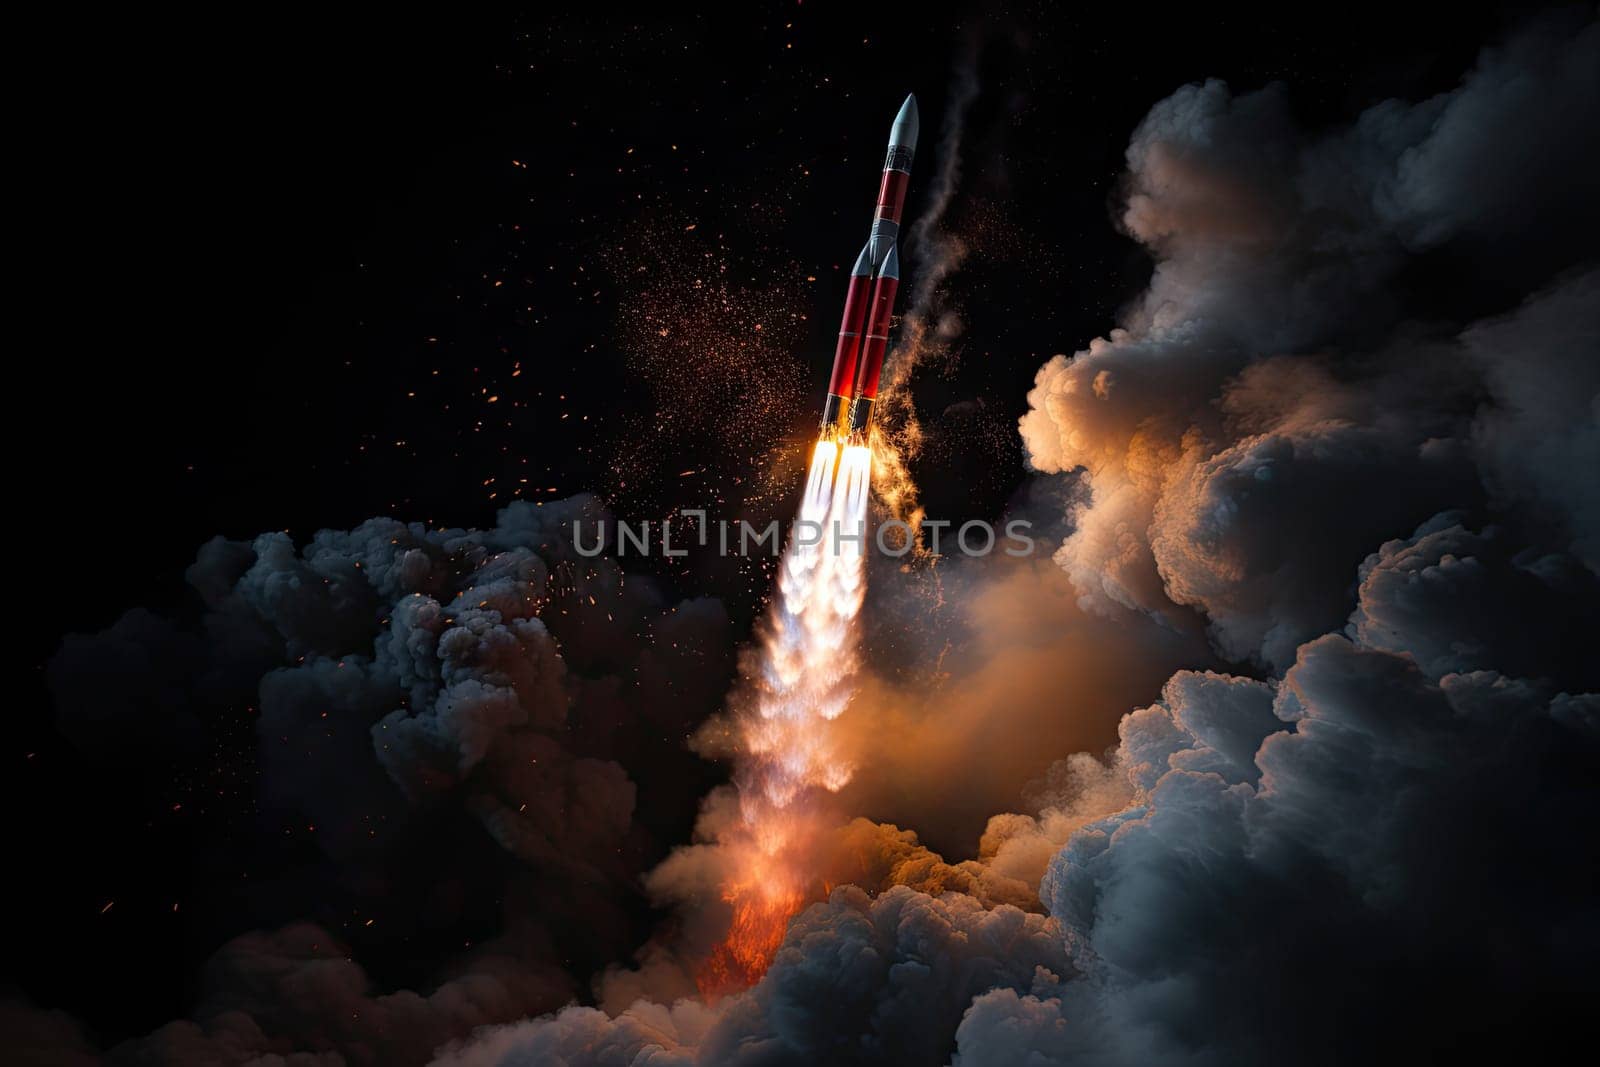 a rocket taking off into the night sky, with smoke and sparks coming from its tail photo shutterstocker